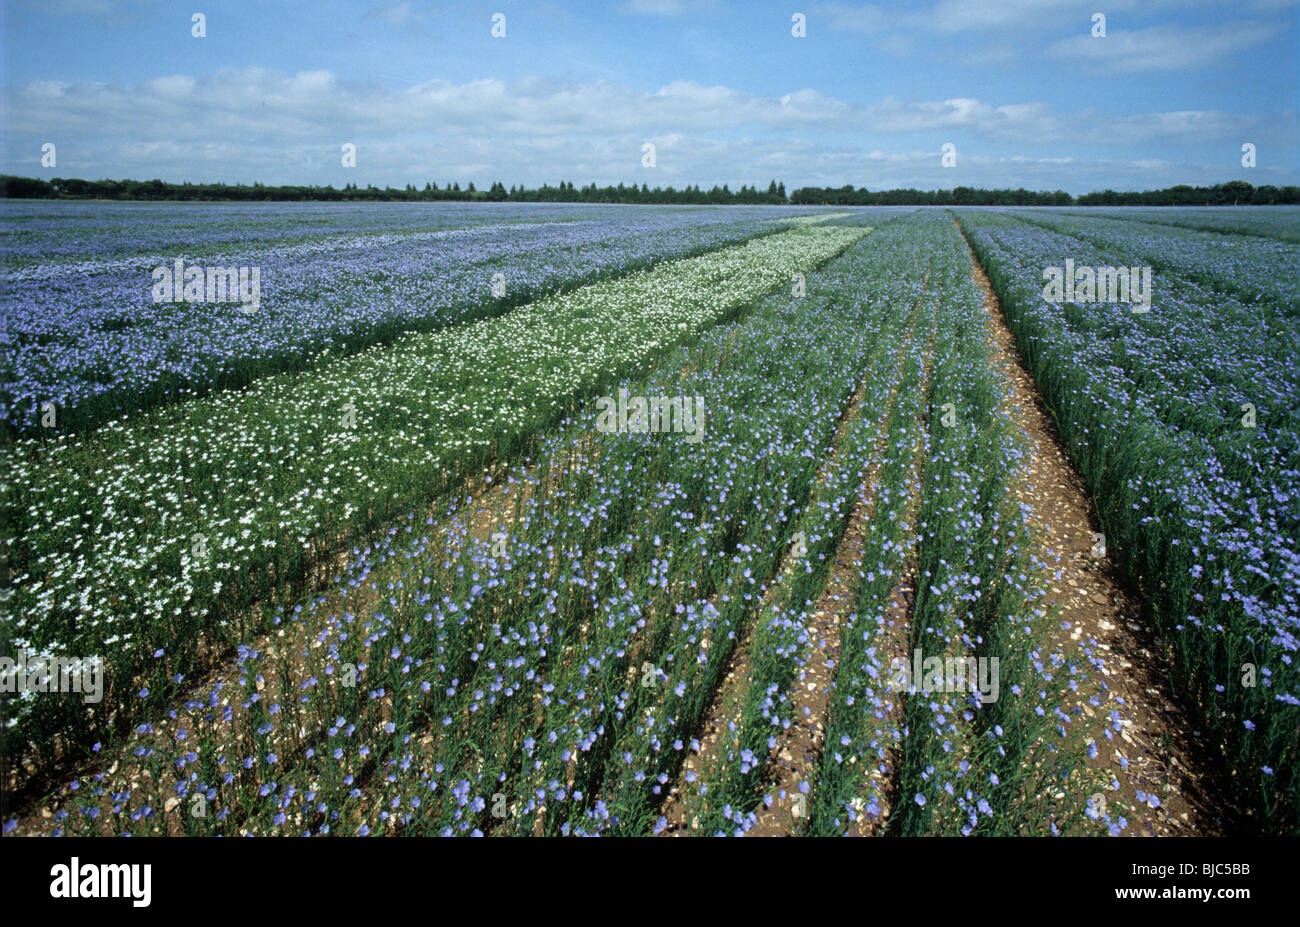 Plant breeding variety trial with linseed crops in full flower Stock Photo